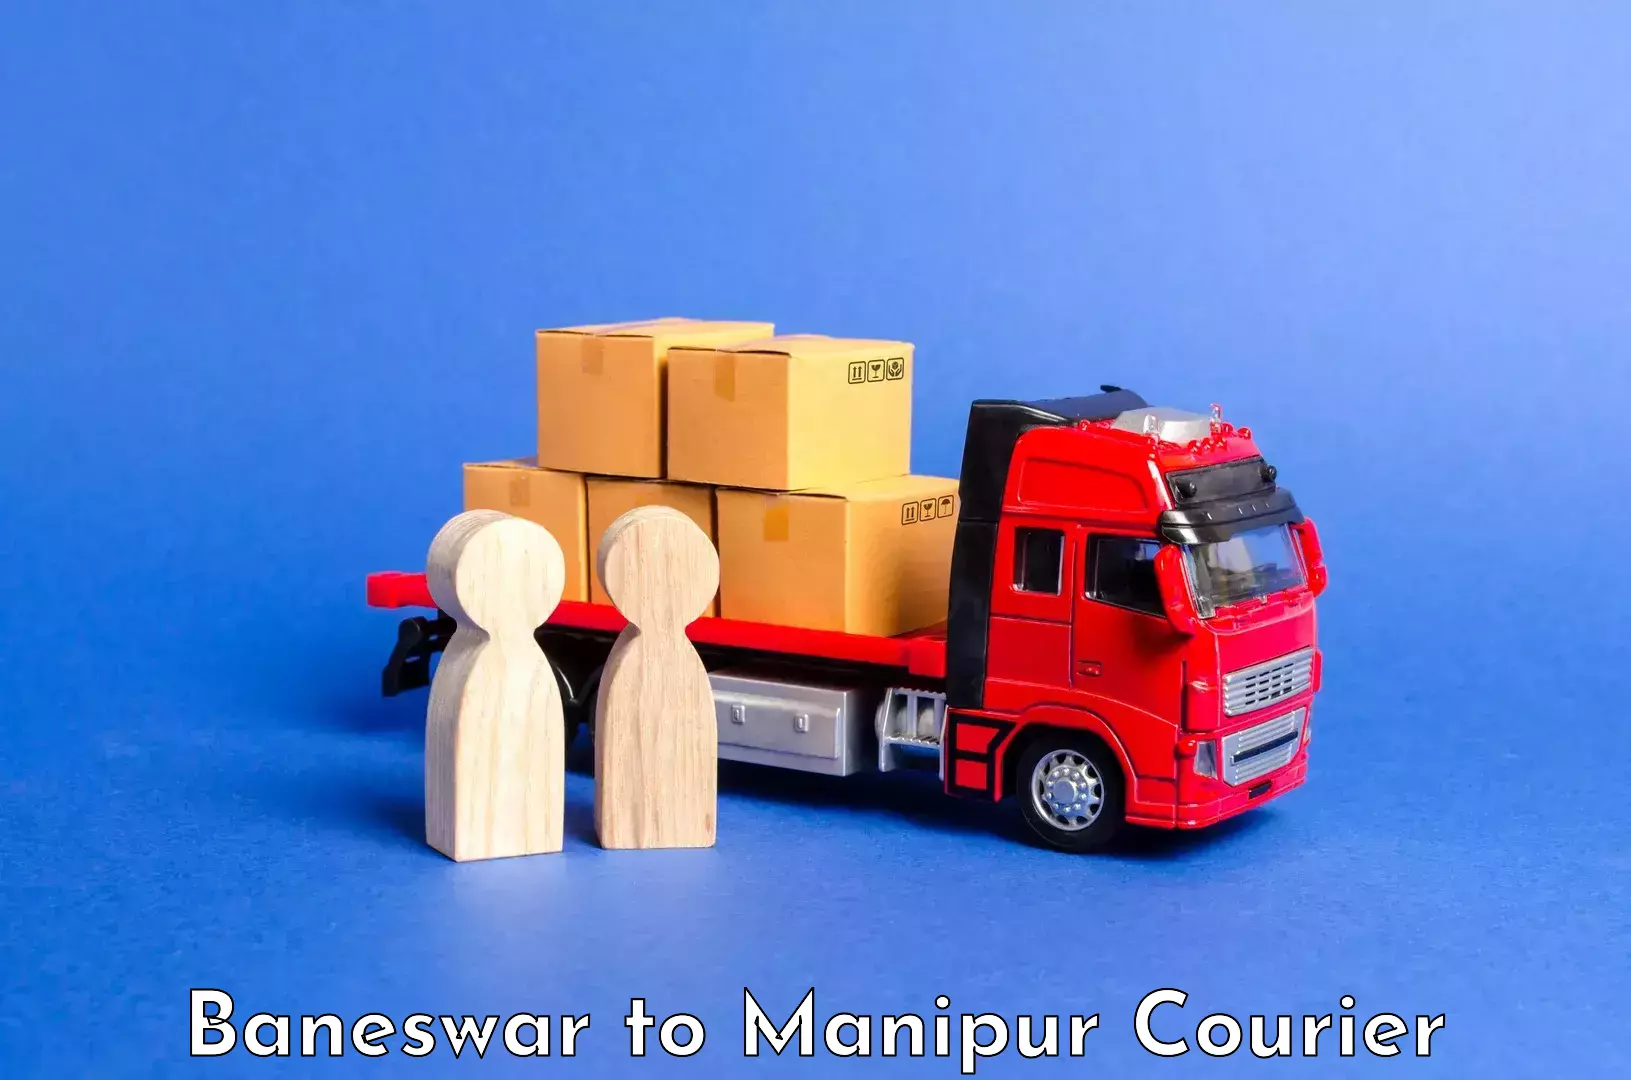 Luggage shipment specialists Baneswar to Manipur